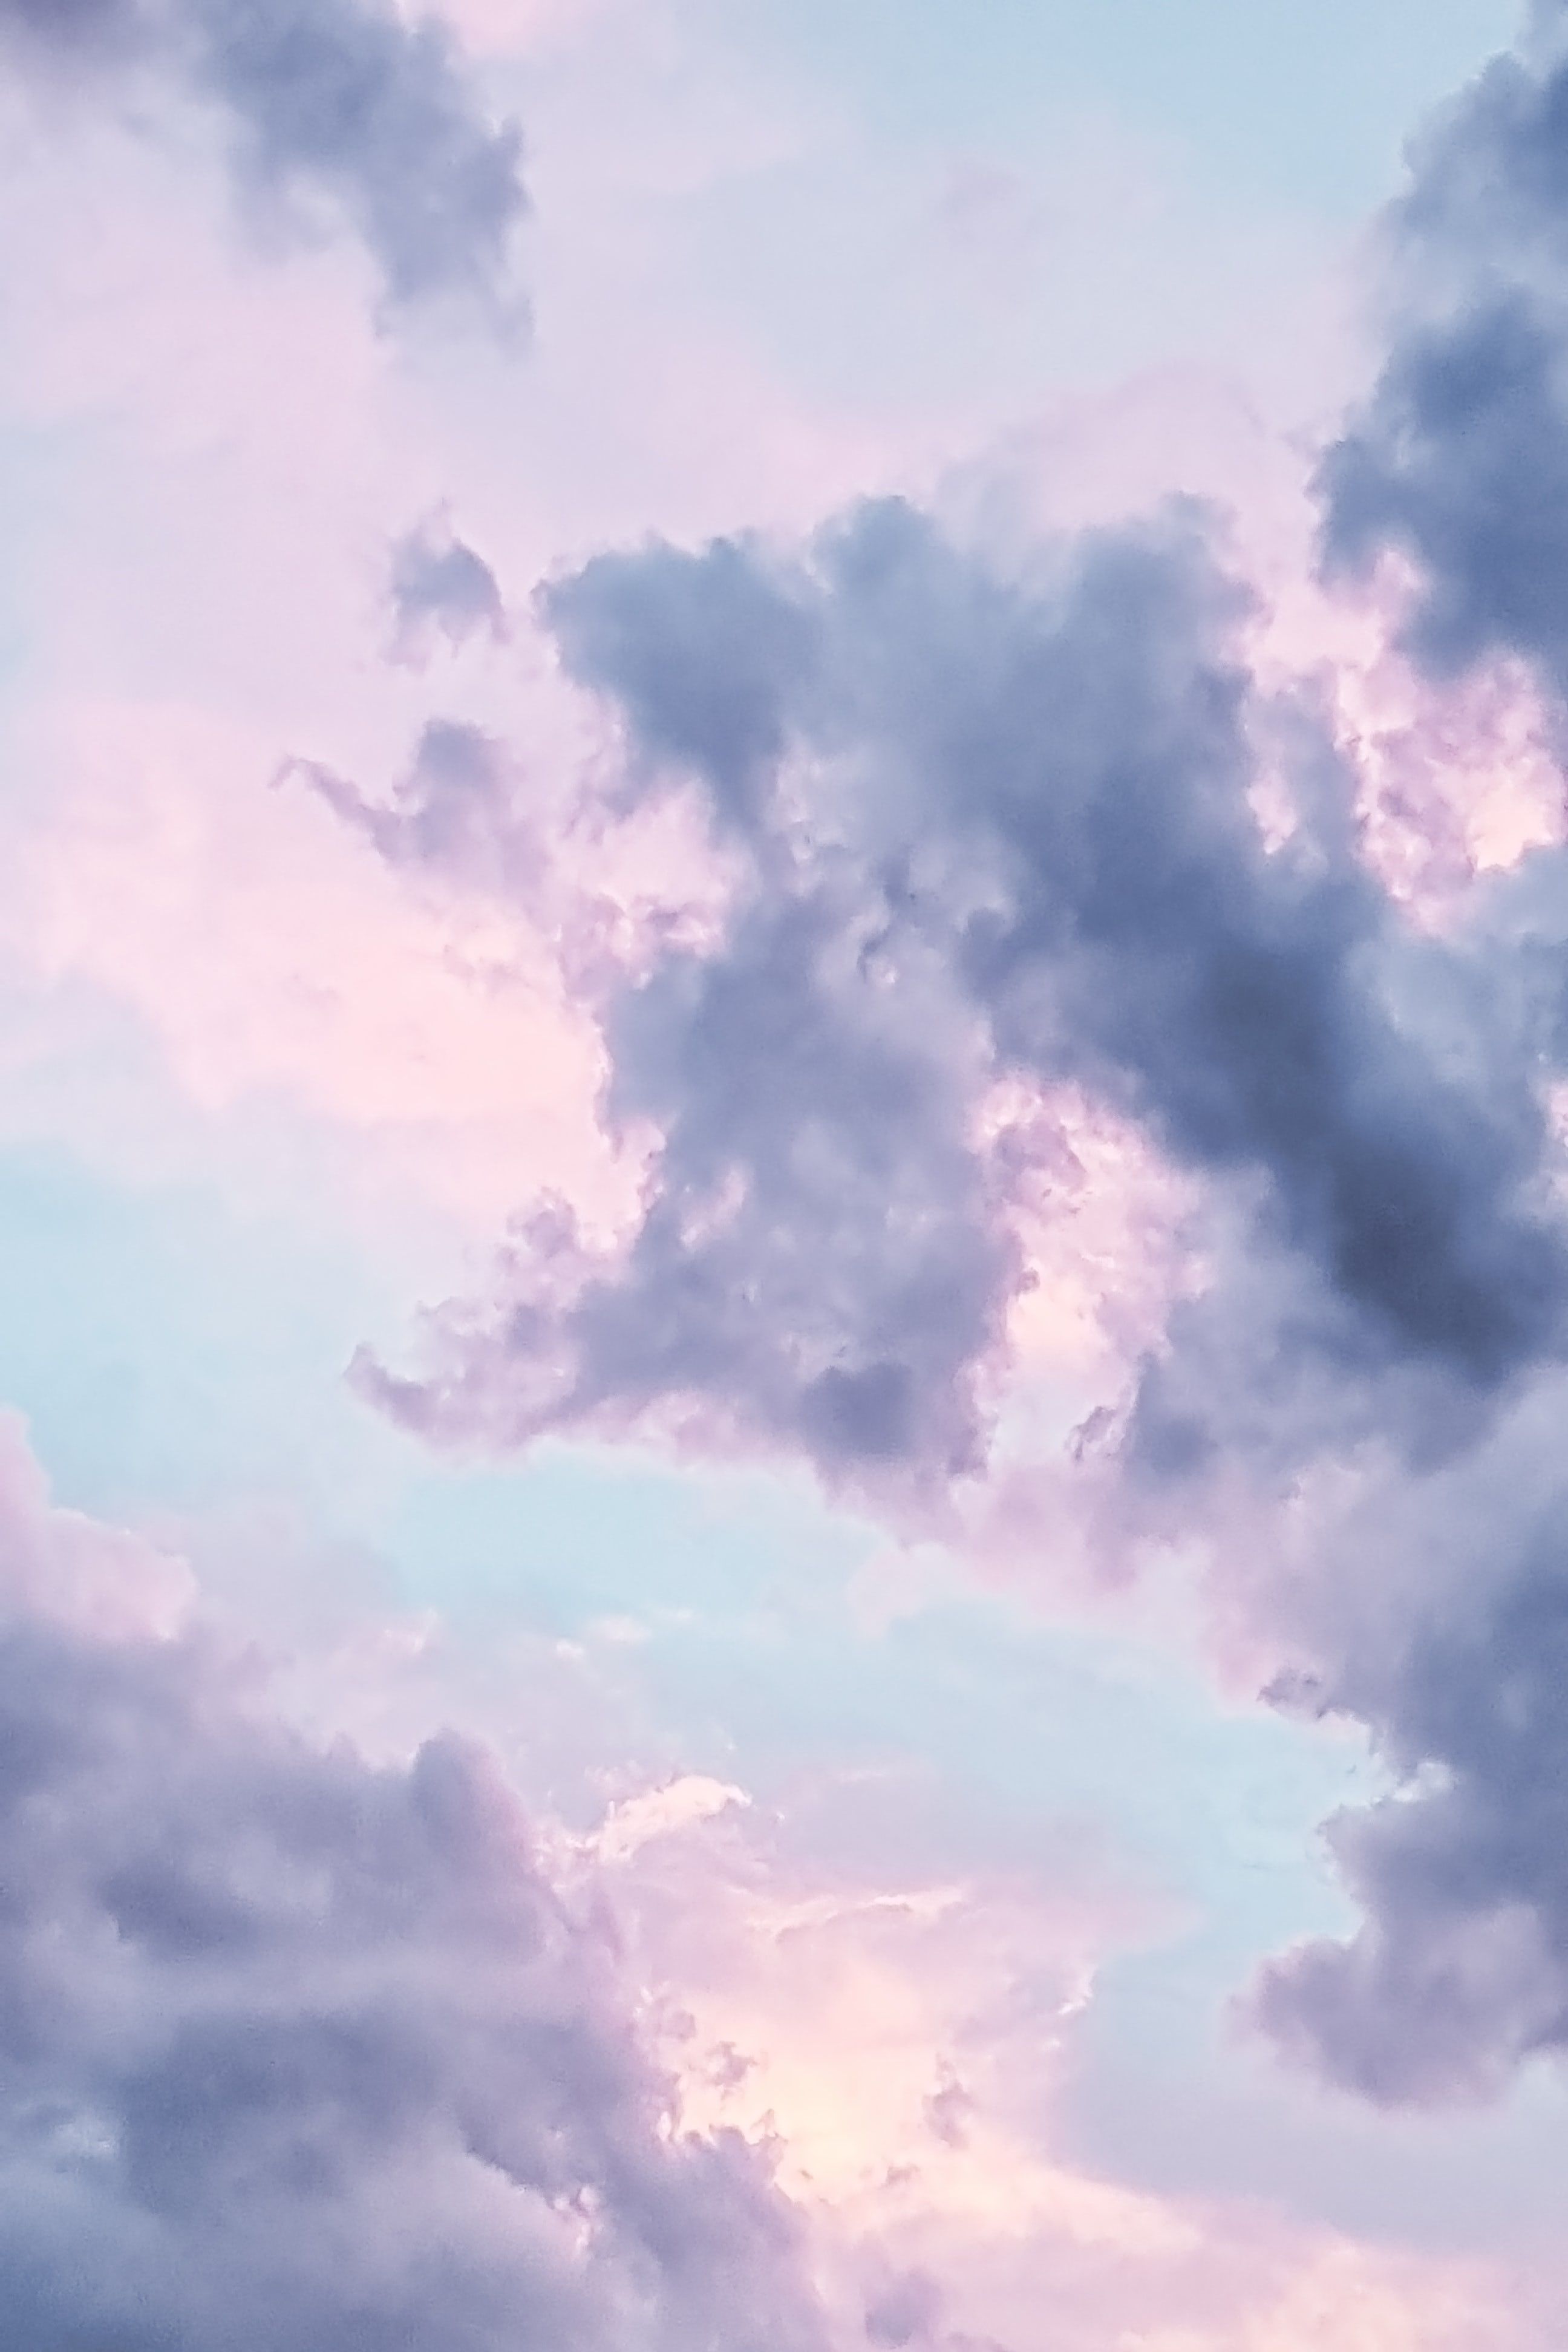 A plane flying through the clouds at sunset - Pastel blue, cute, beautiful, calming, cloud, vintage clouds, phone, iPhone, pink phone, peace, pastel rainbow, night, pastel